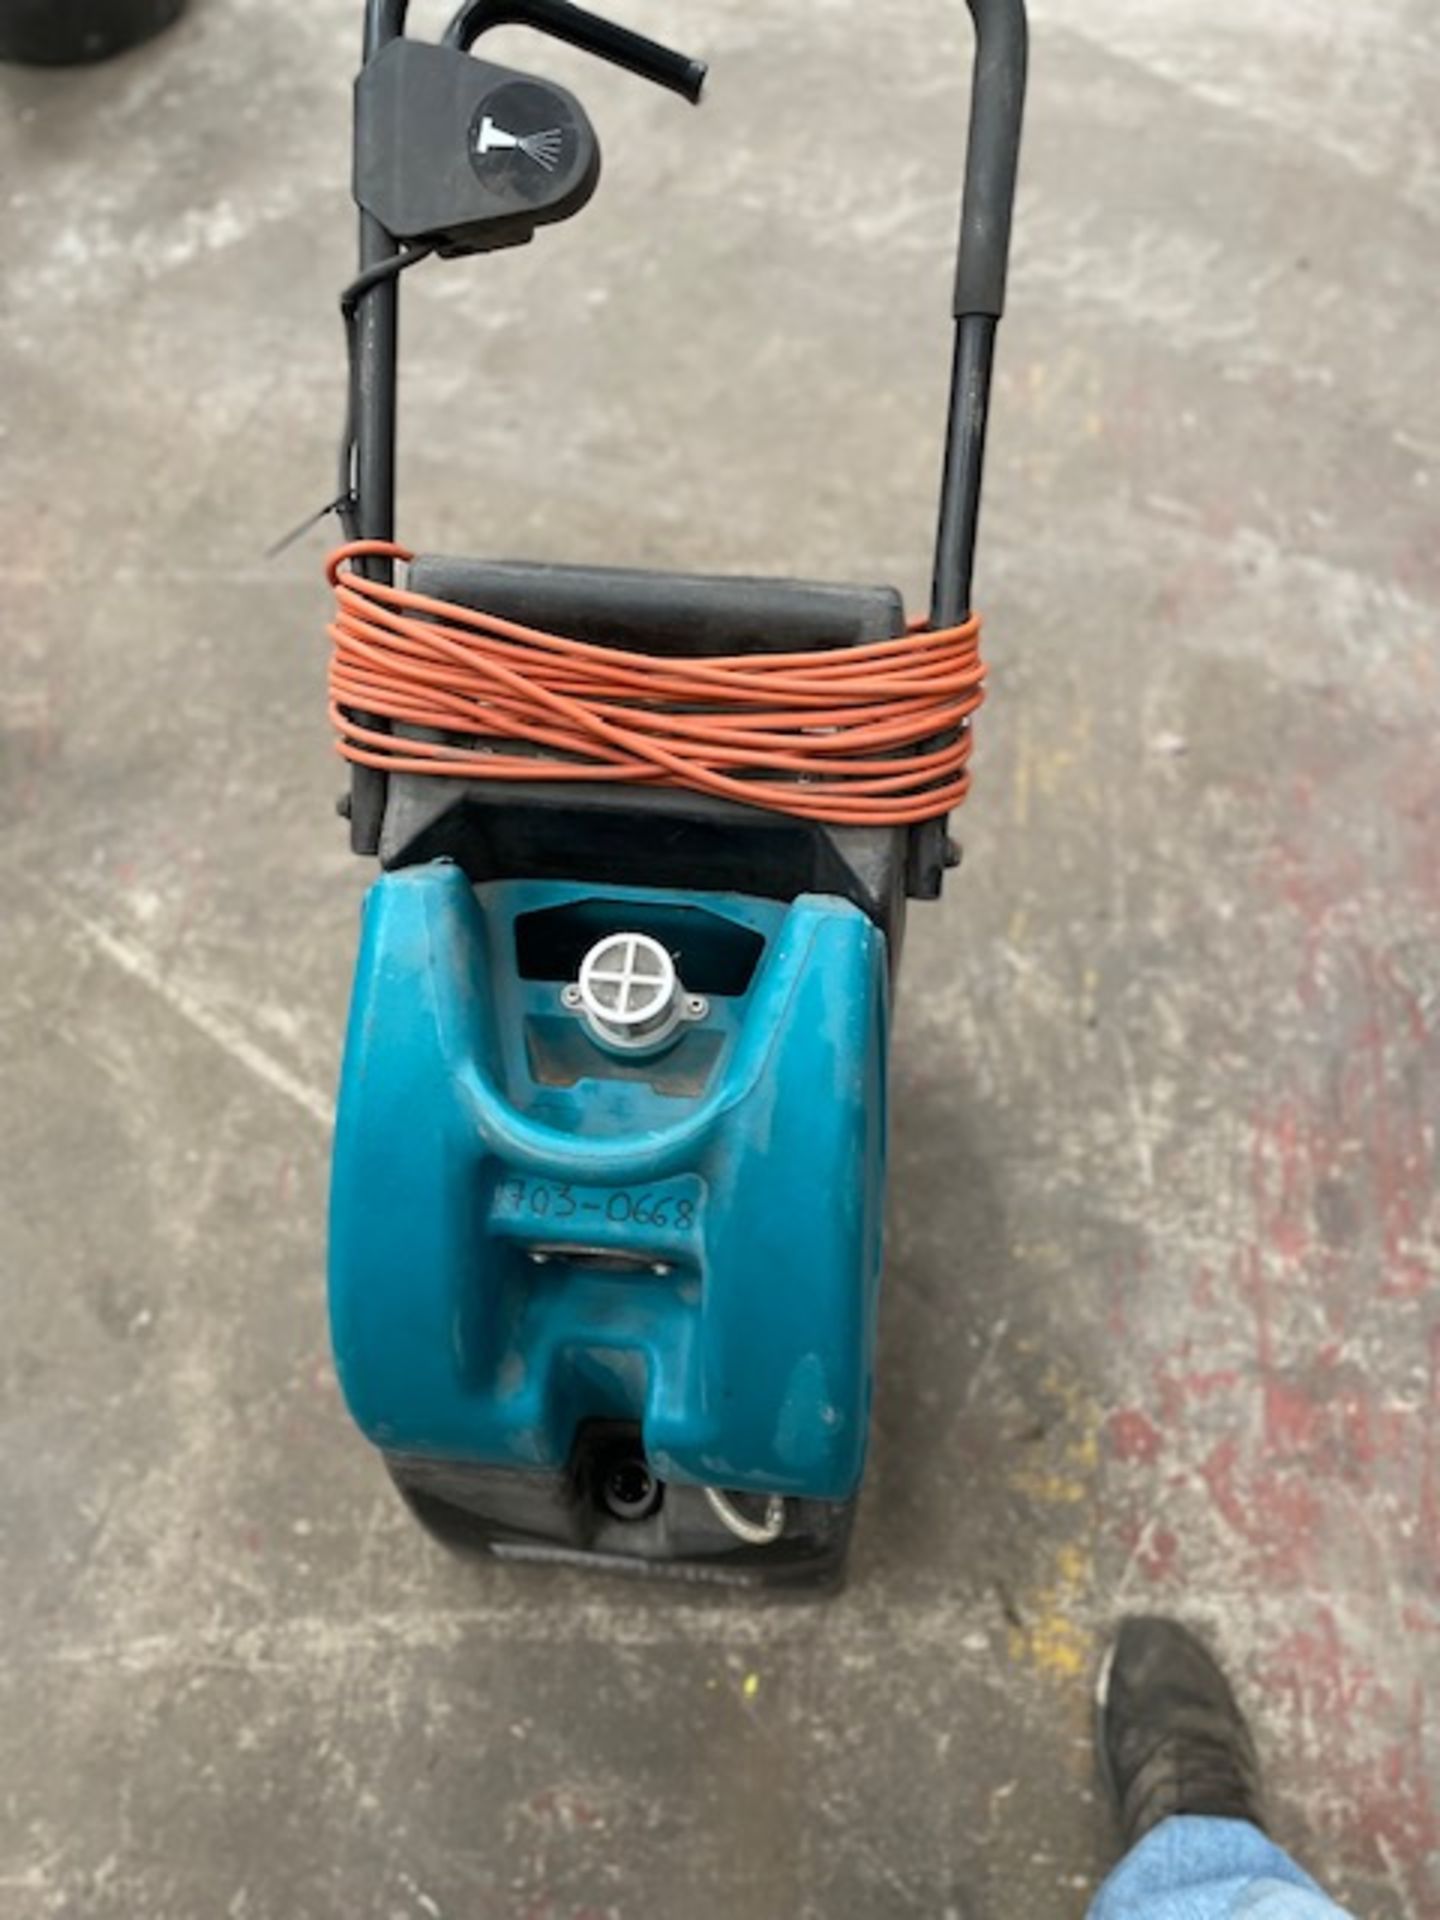 Sweeper 240 volt works but needs a new brush for underneath